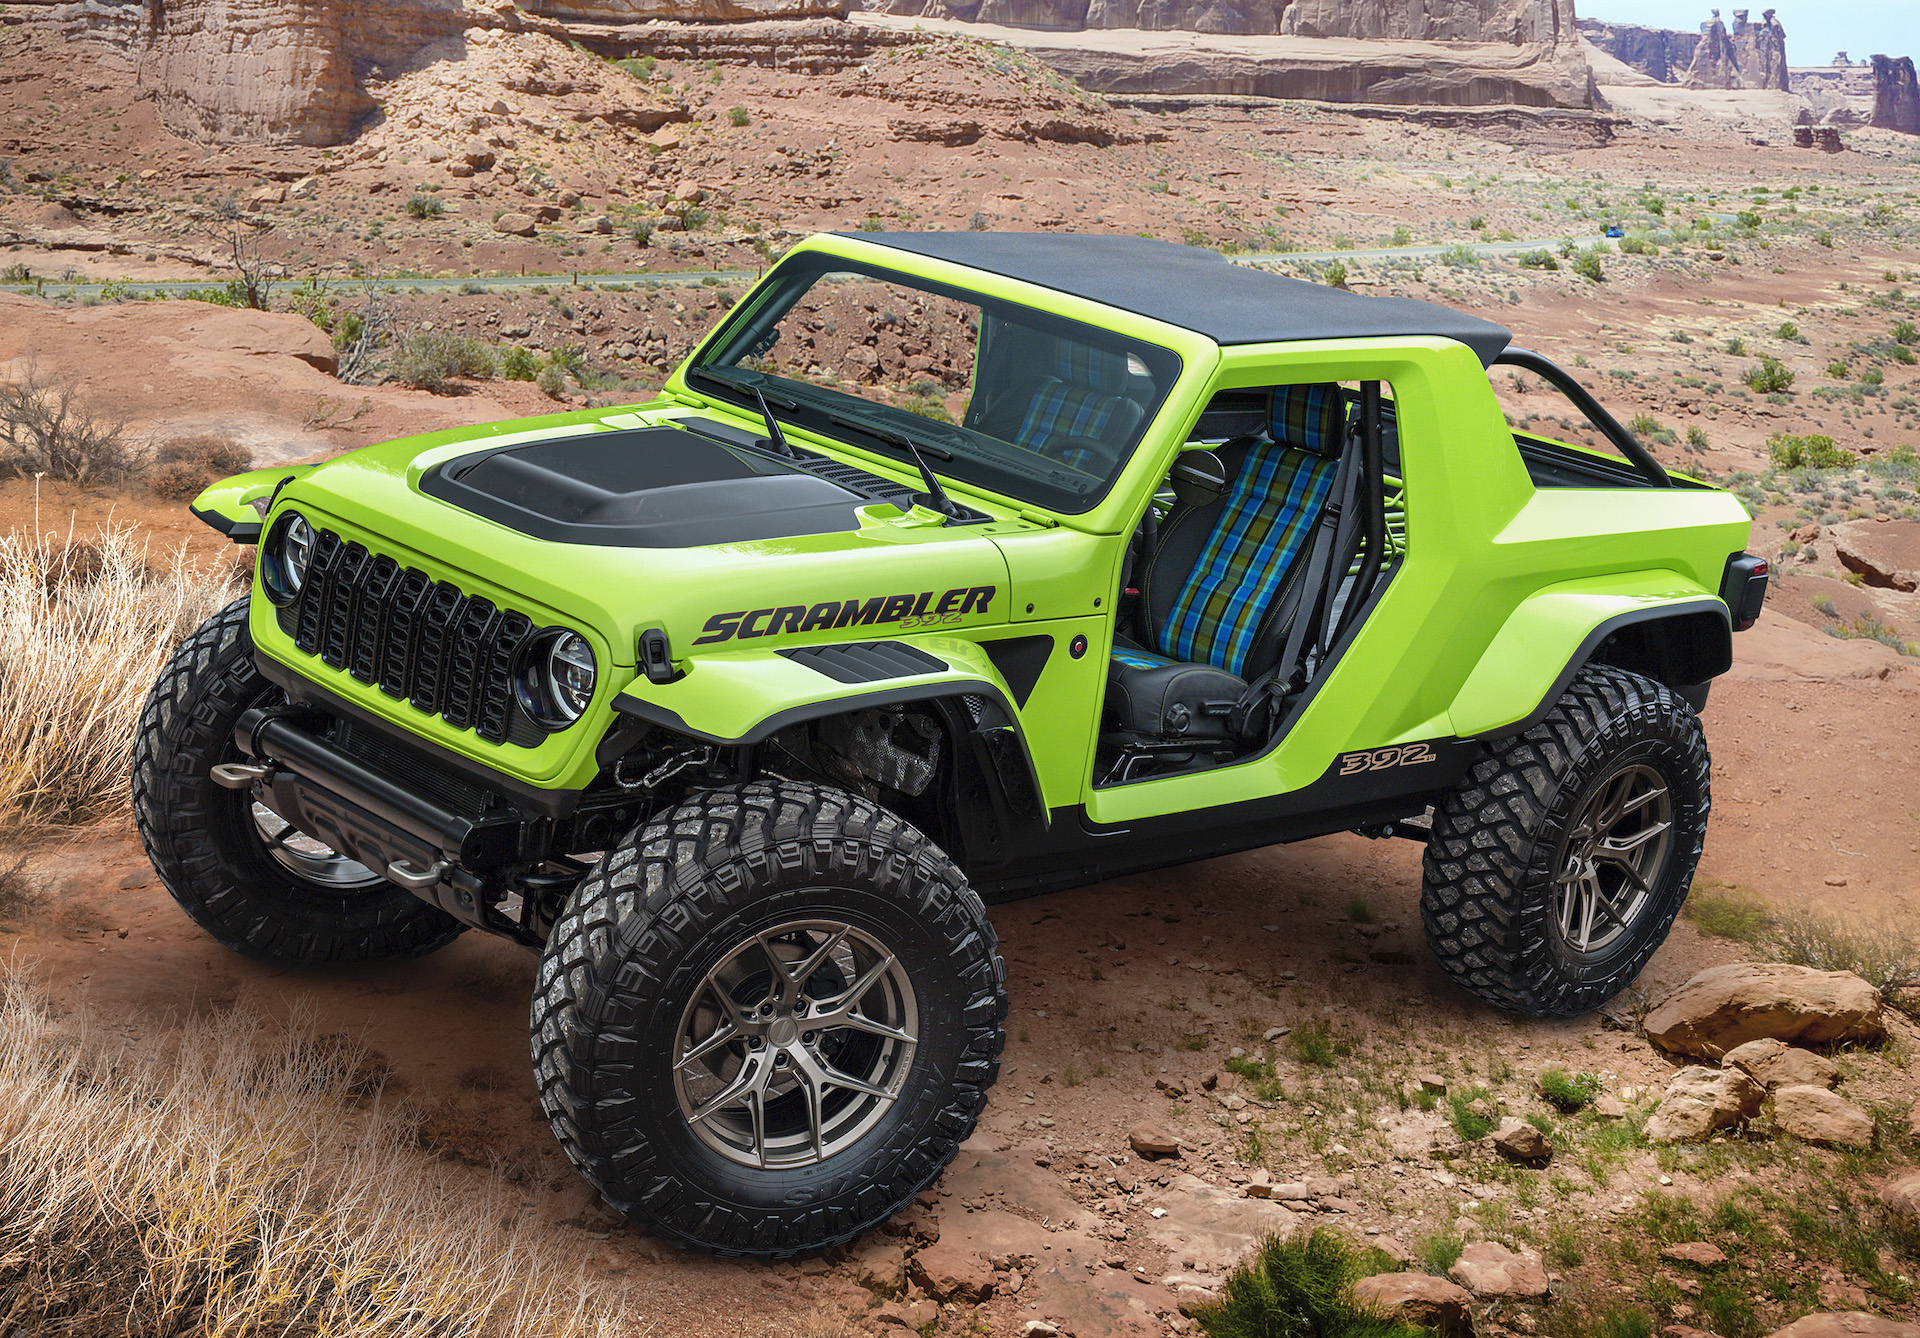 Jeep Gladiator Jeep Unveils 7 Easter Jeep Safari 2023 Concept Vehicles, including Gladiator Rubicon Sideburn Concept and Scrambler 392 [Updated w/ Videos] jeep-scrambler-392-concept_100879532_h-